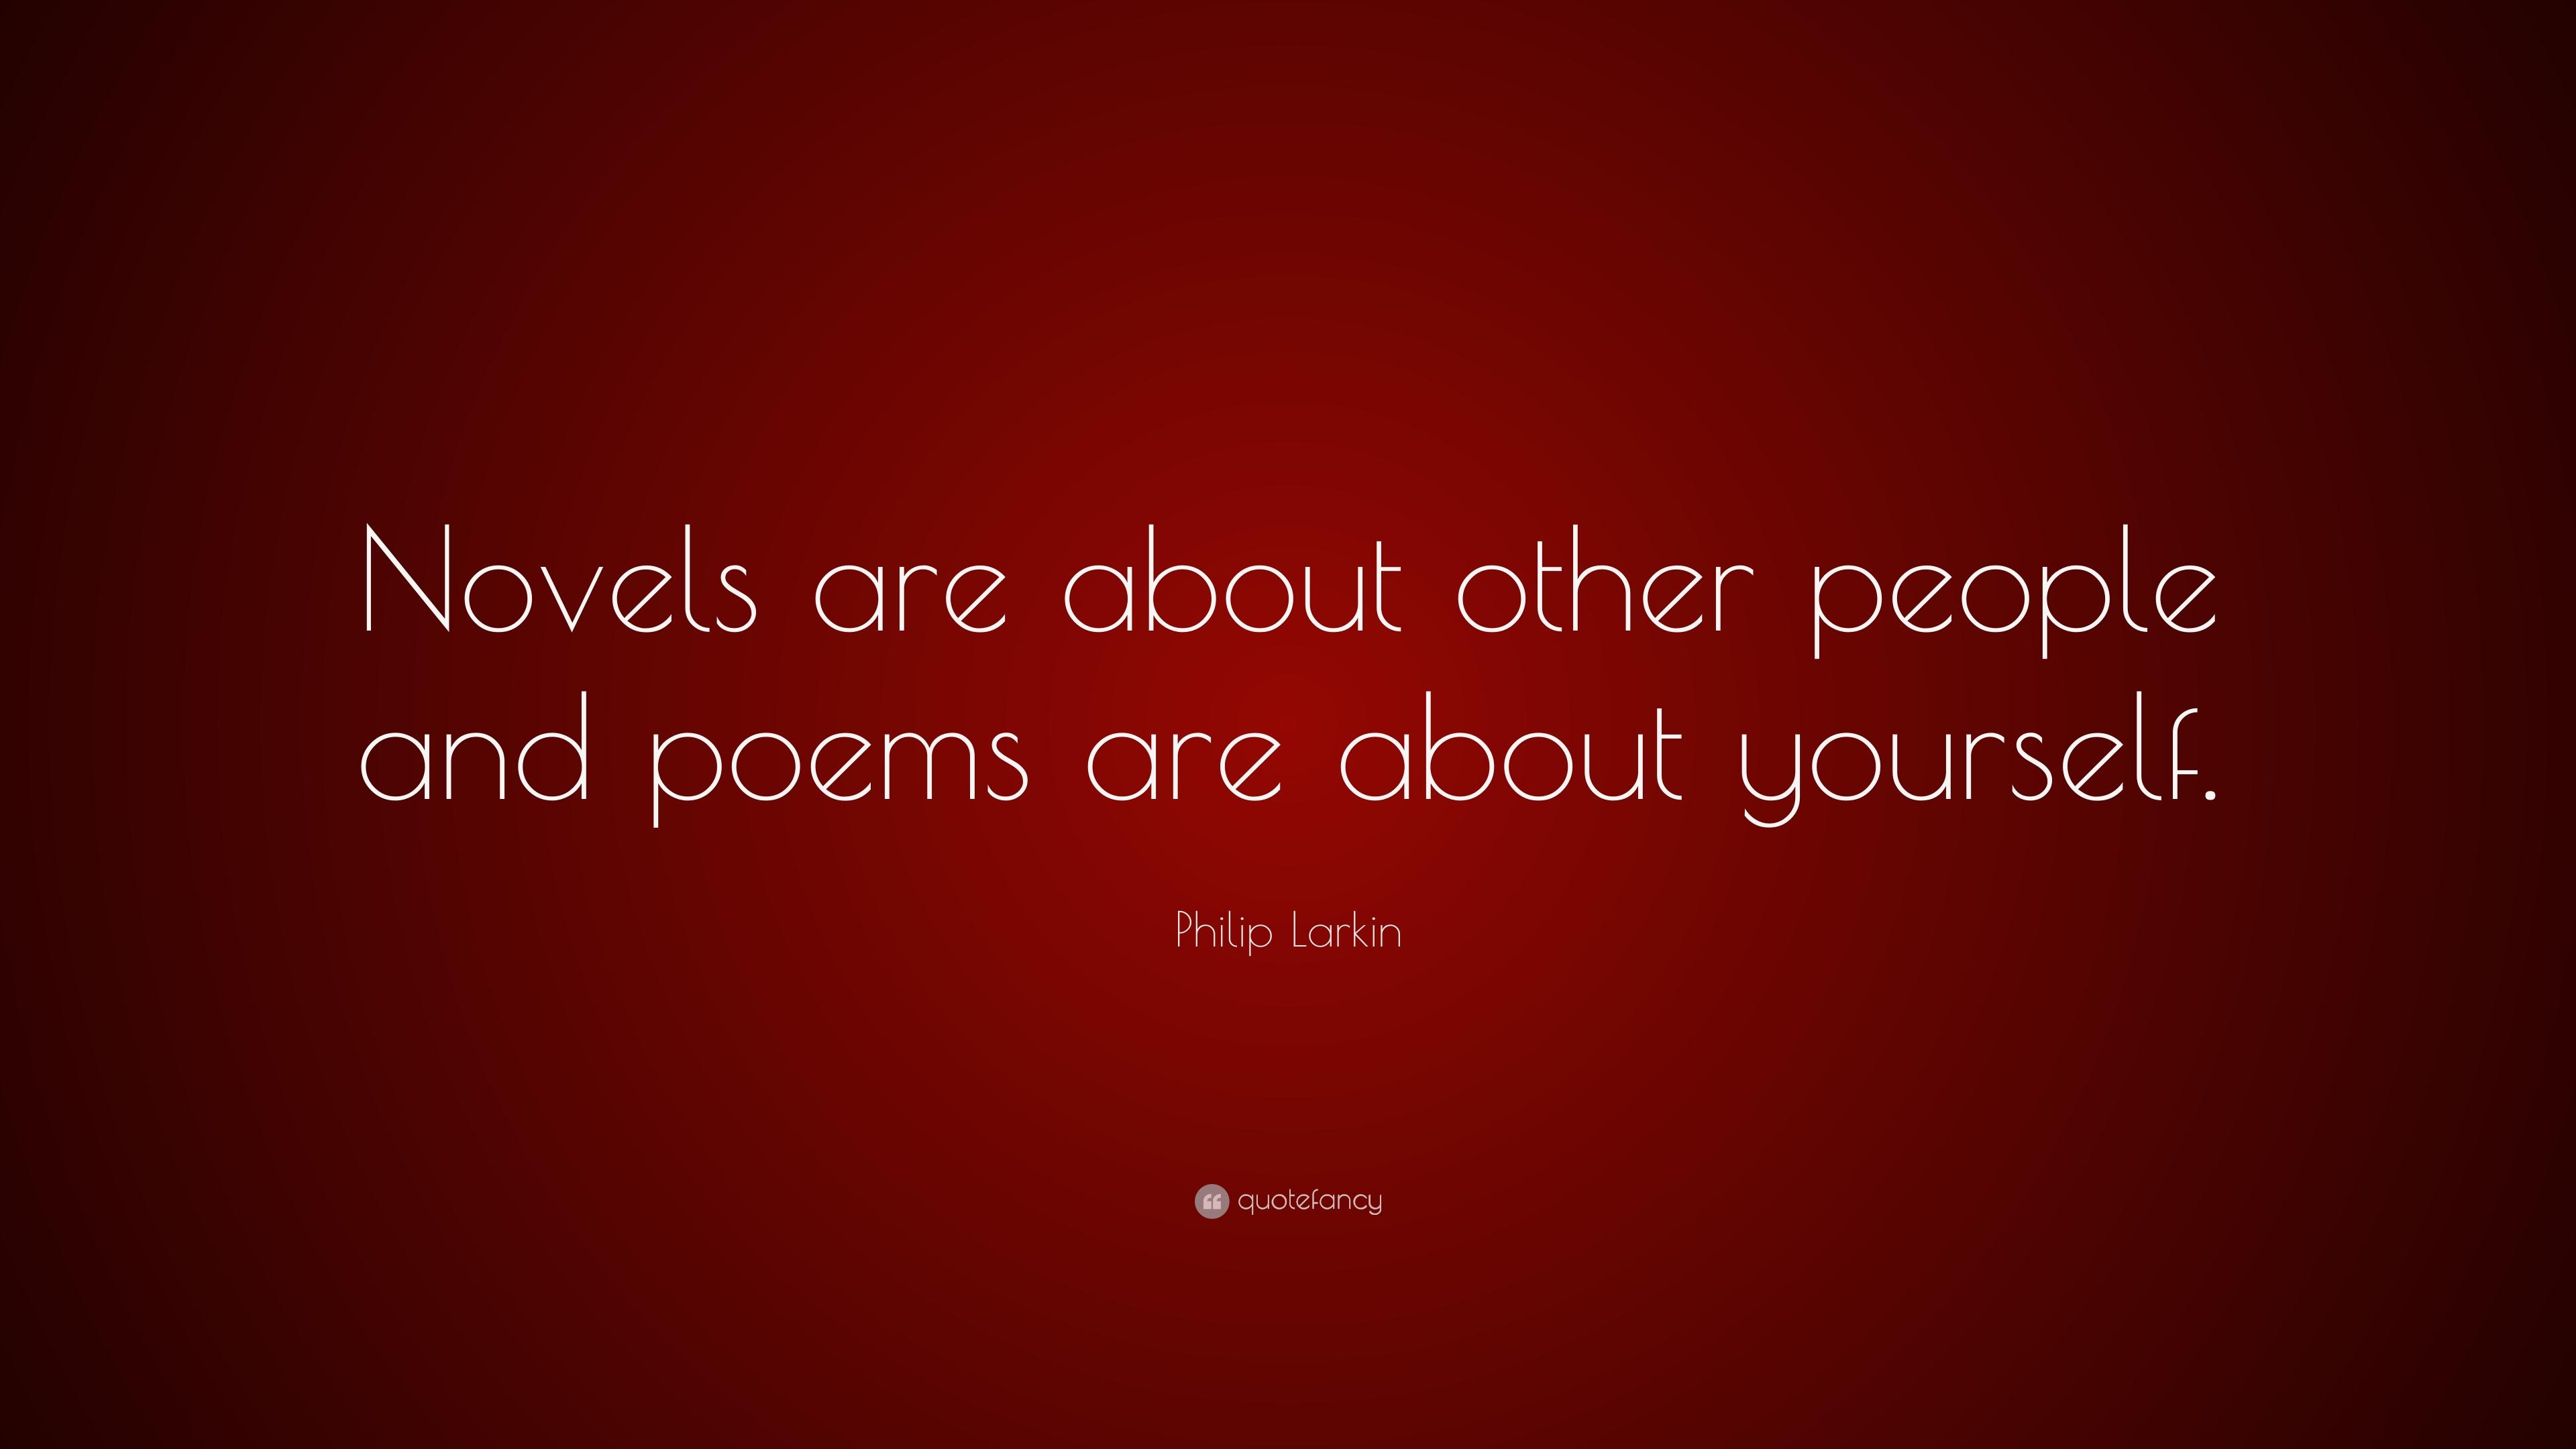 Philip Larkin Quote: “Novels are about other people and poems are